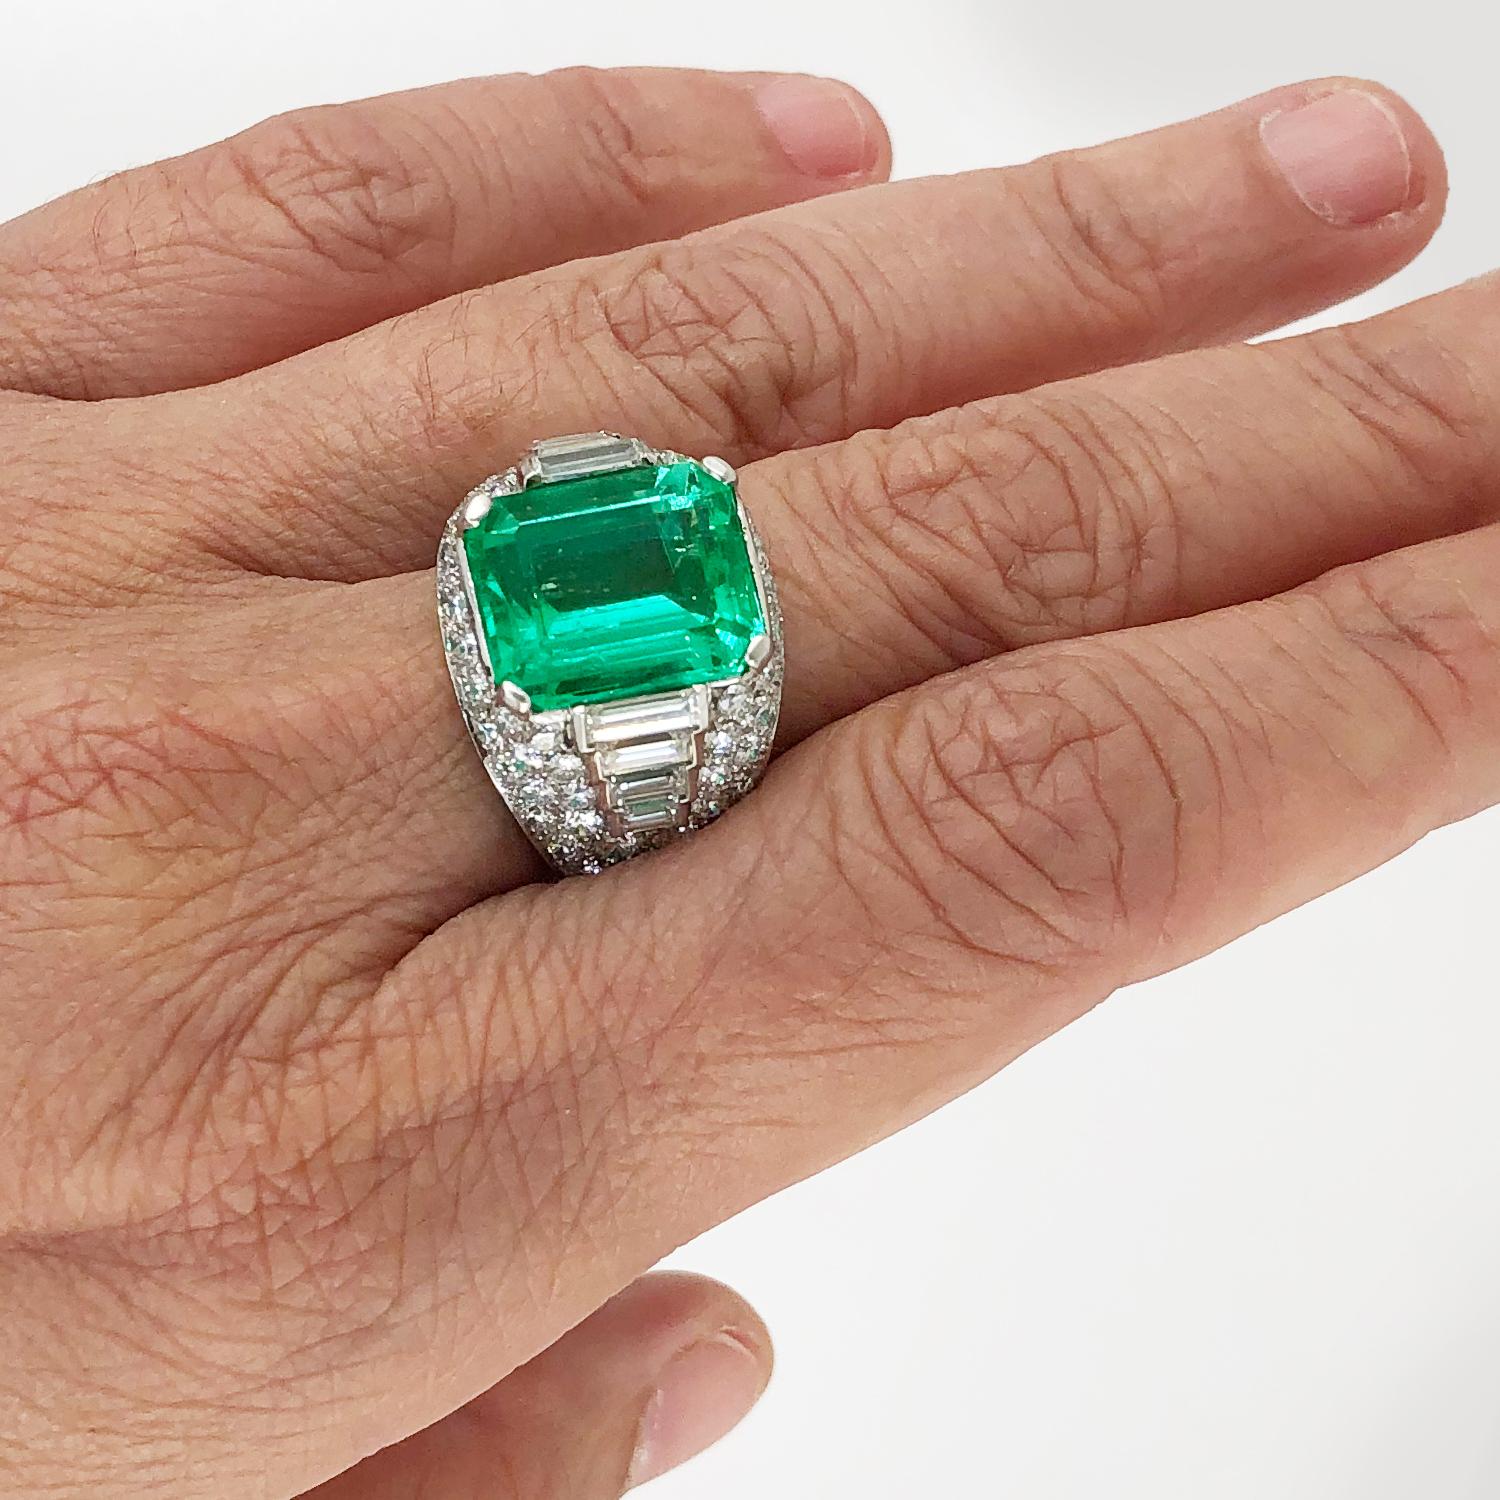 BULGARI “Trombino” Emerald, Diamond Ring
The 'Trombino Ring' was created by the head of the atelier Signor Trombino before the war for Mr.Bulgari
A platinum ring, set with emerald and diamonds, signed Bulgari
emerald weight approx. 7.81 cts.
ring